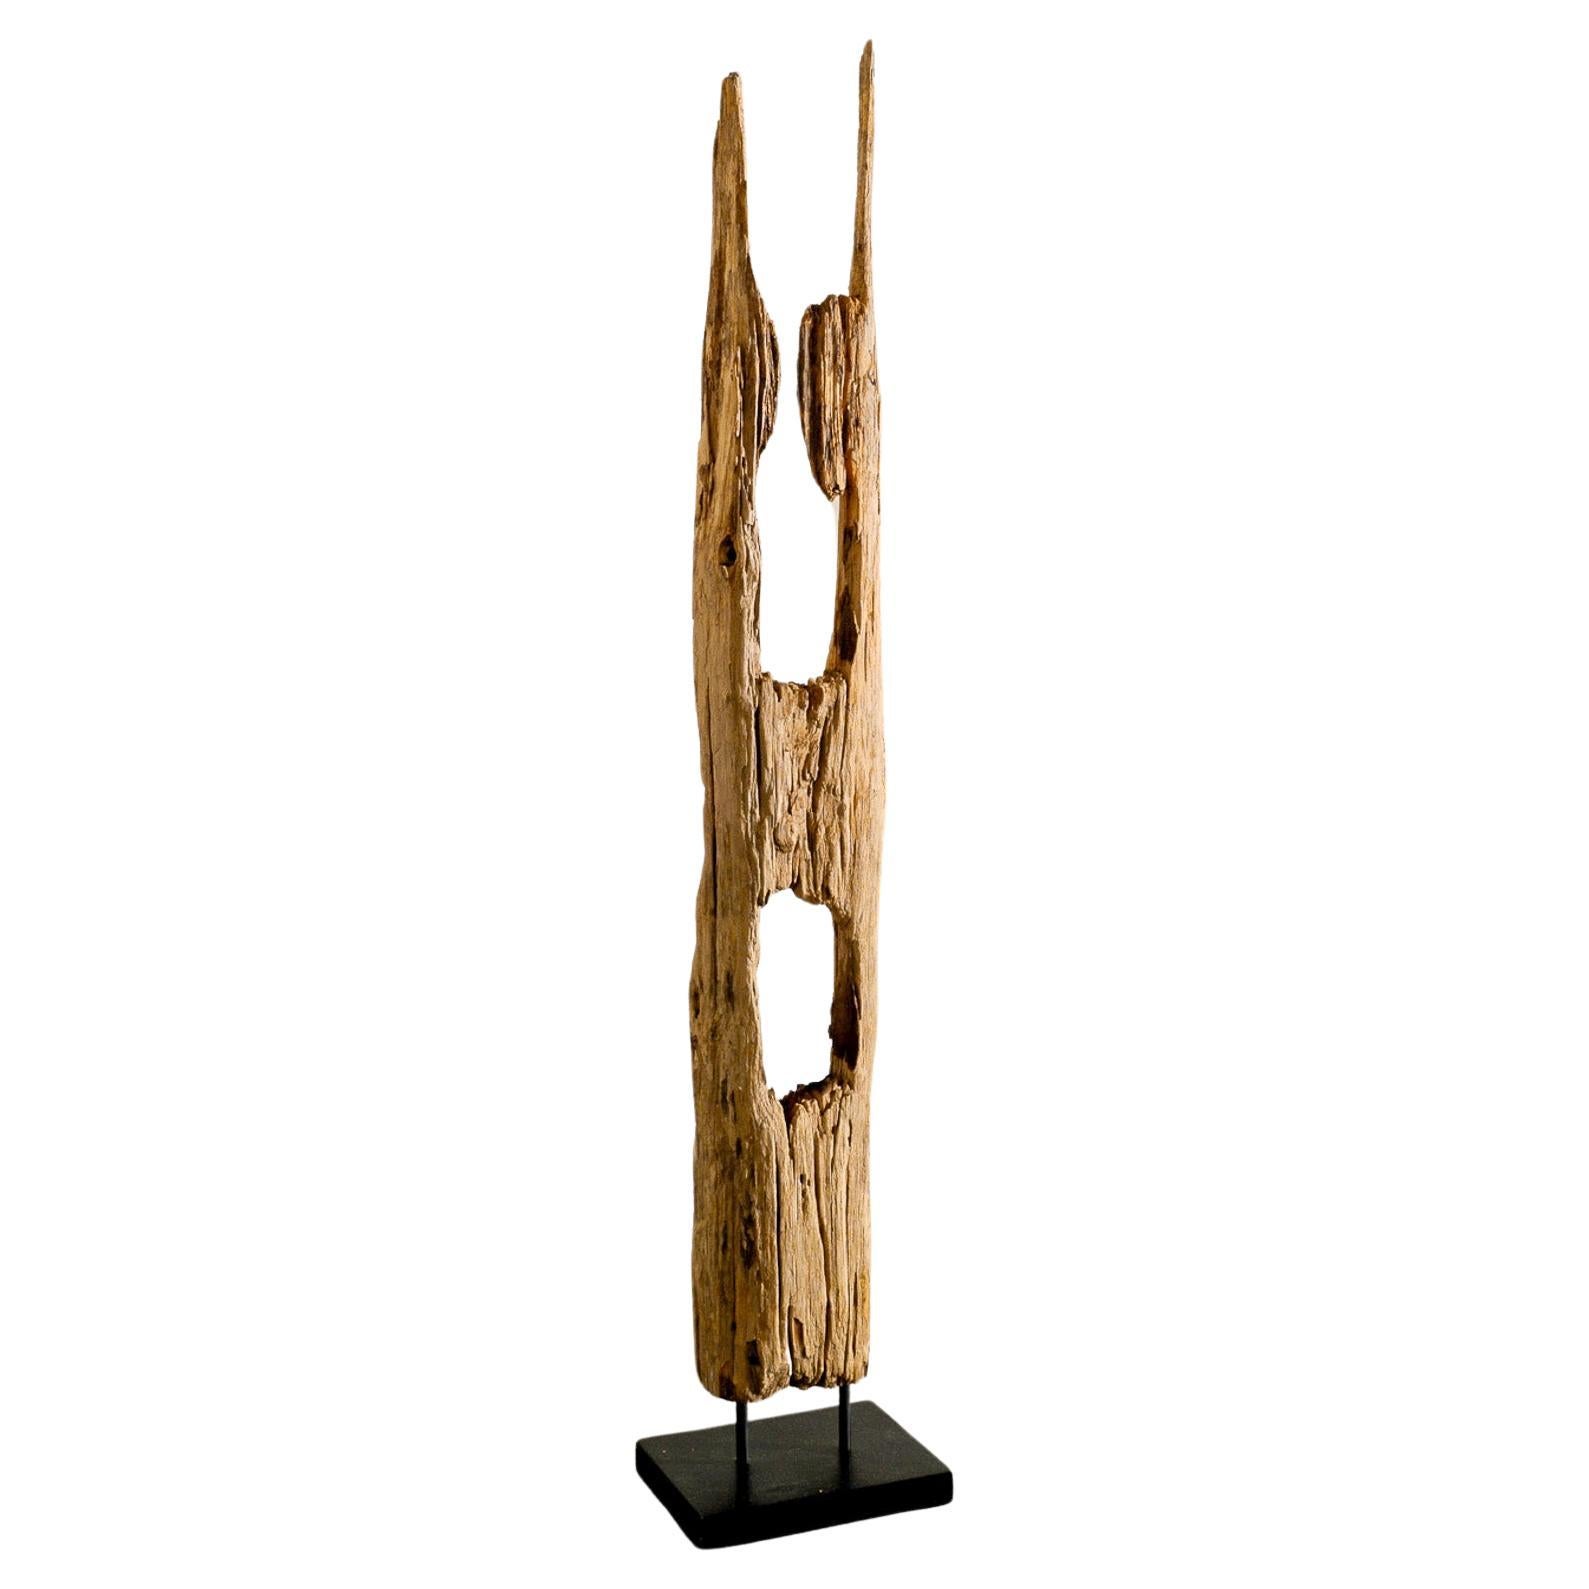 Unique Wooden Floor Toteme Sculpture in a Wabi Sabi and Brutalist Style For Sale